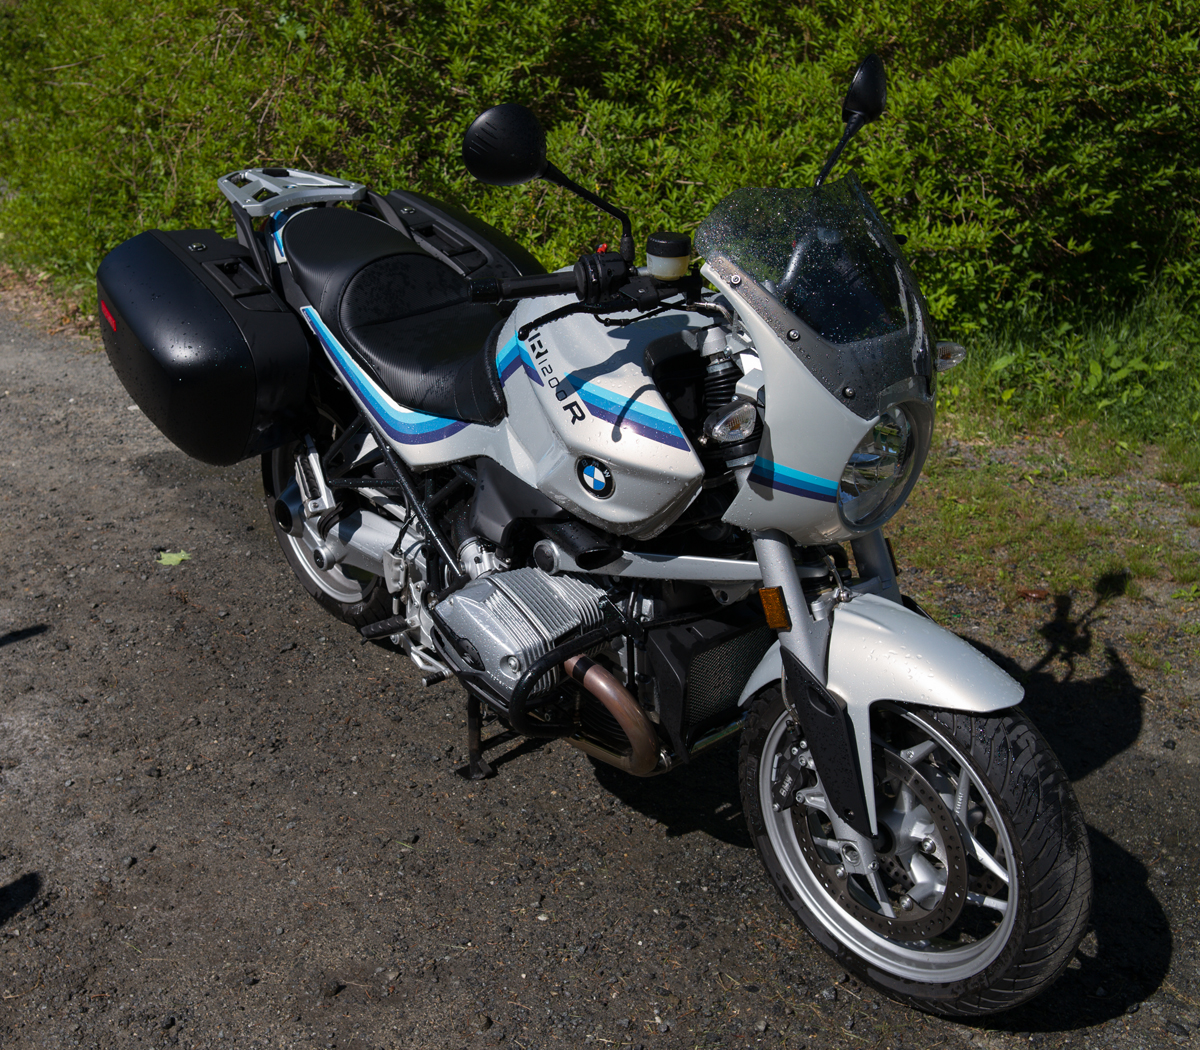 Bmw motorcycle dealerships in vermont